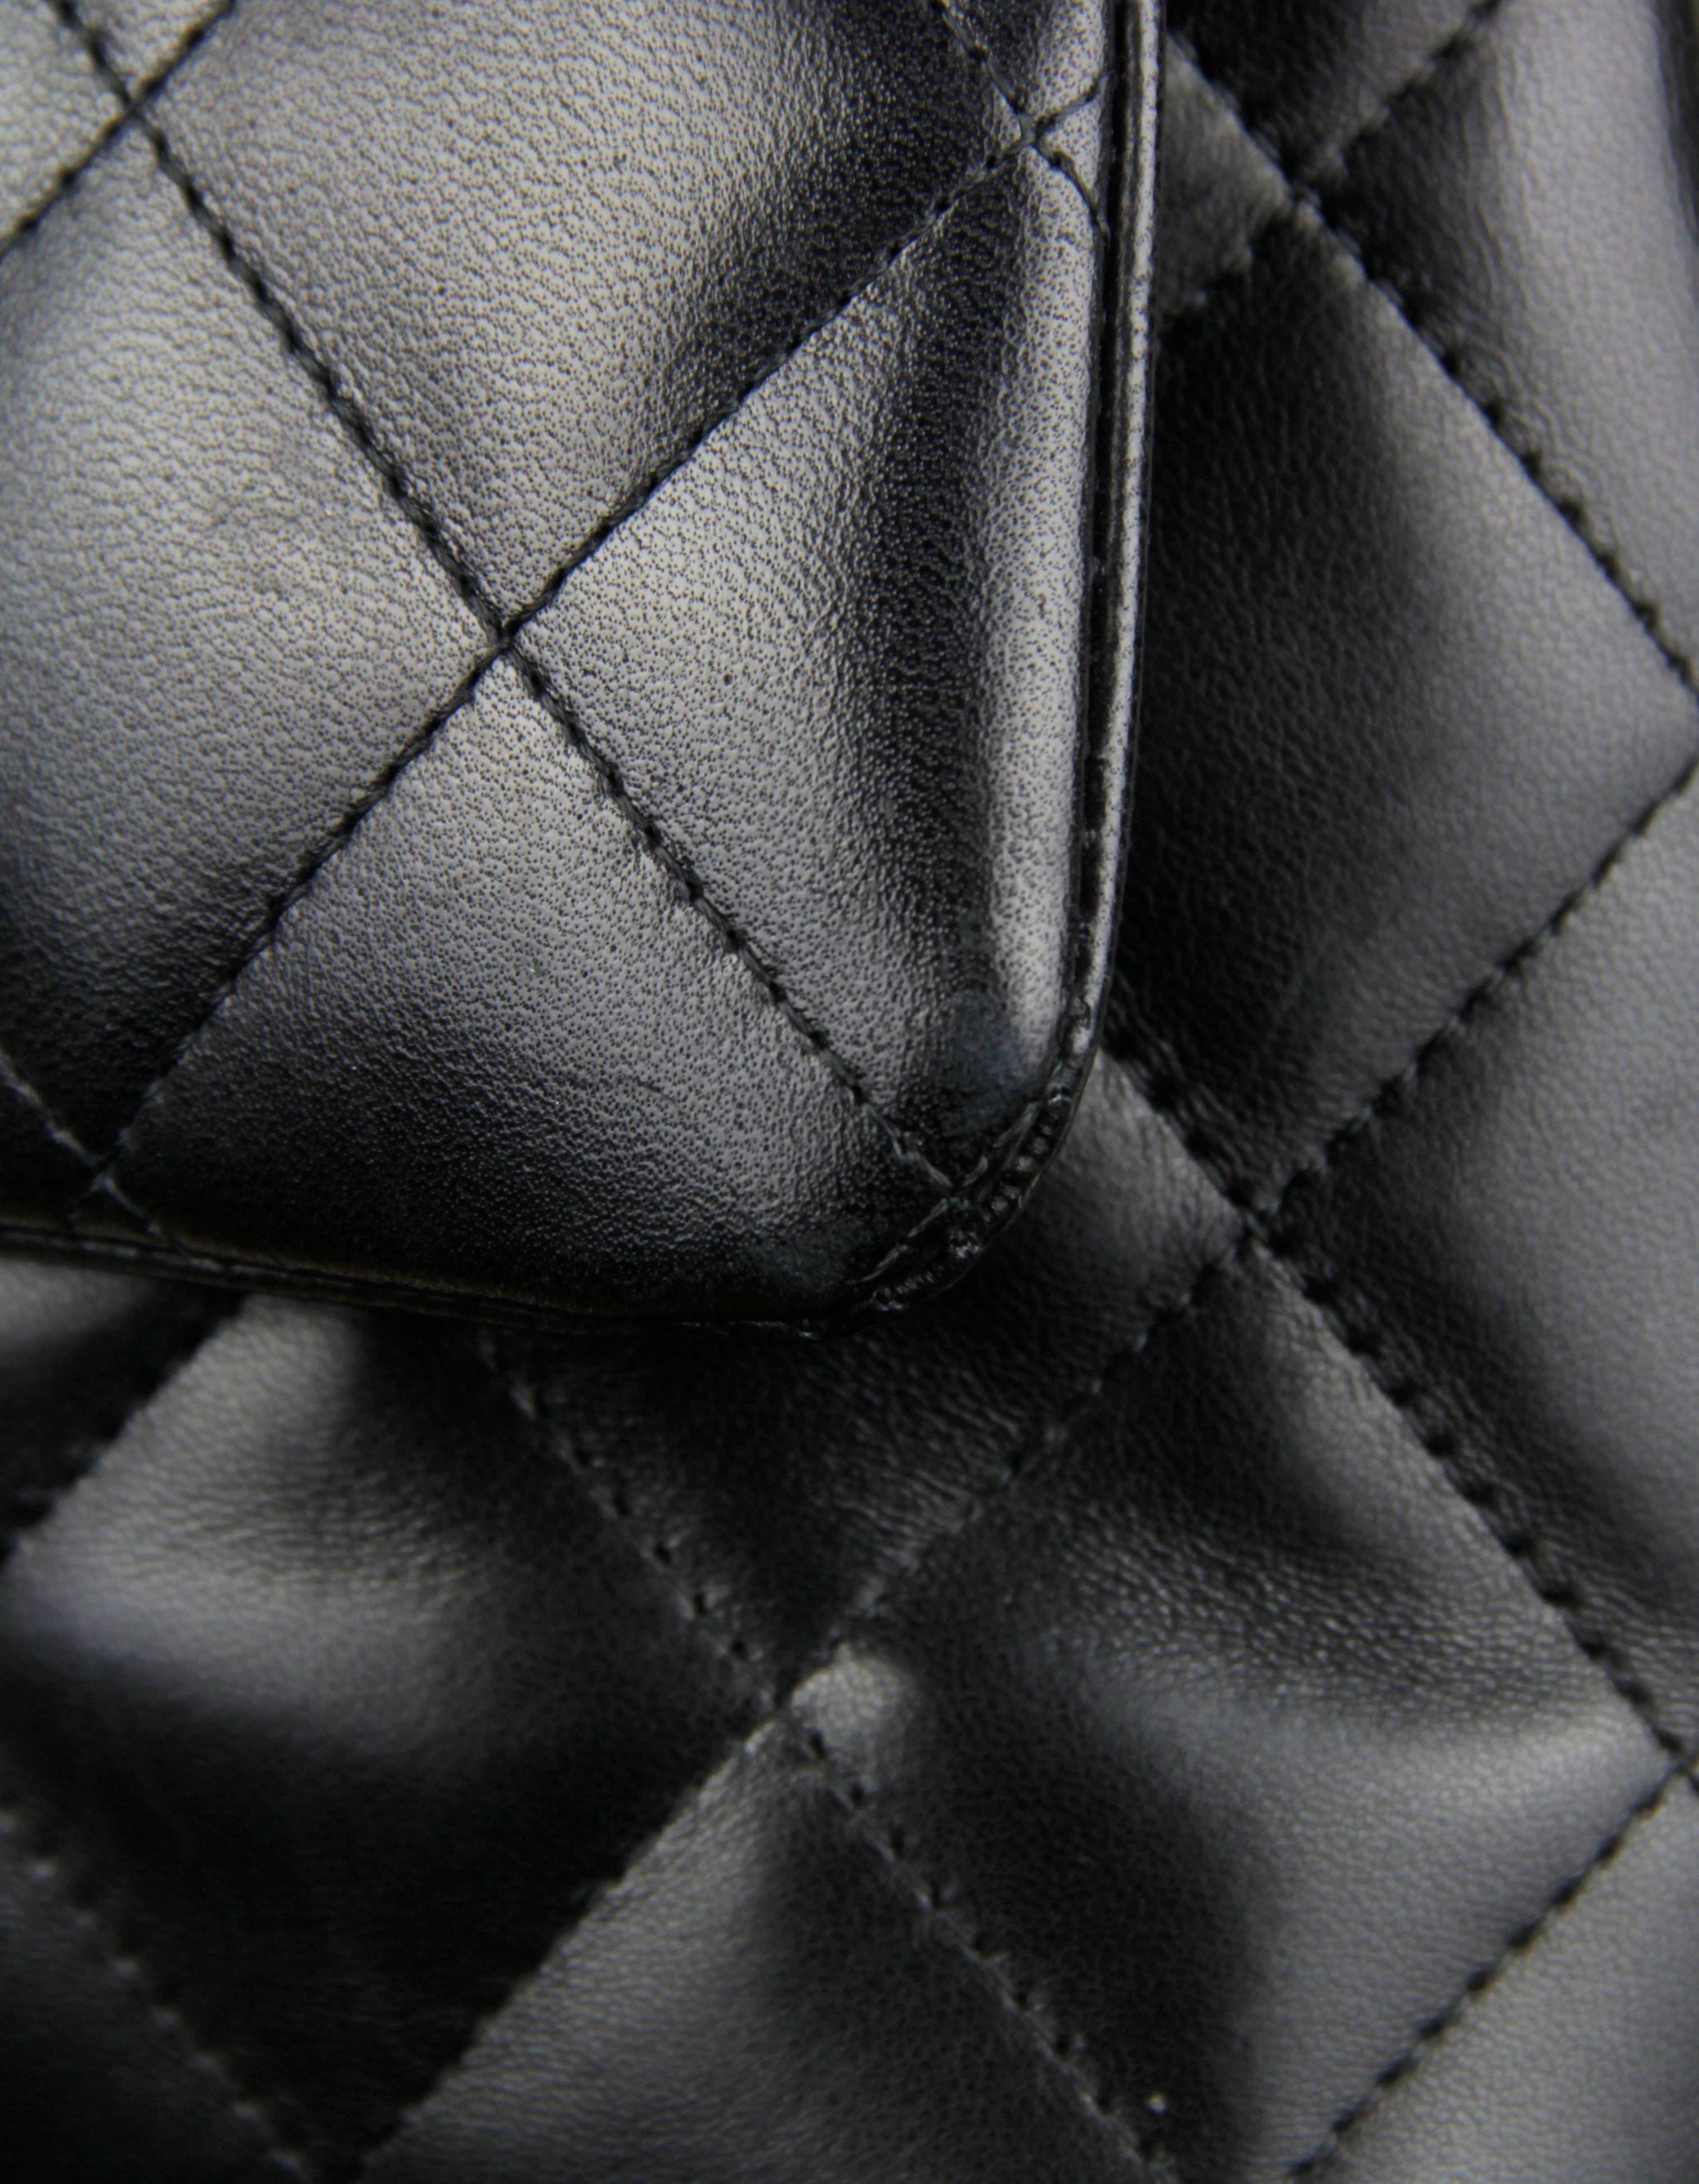 Chanel Black Lambskin Leather Kelly Style Classic Bag